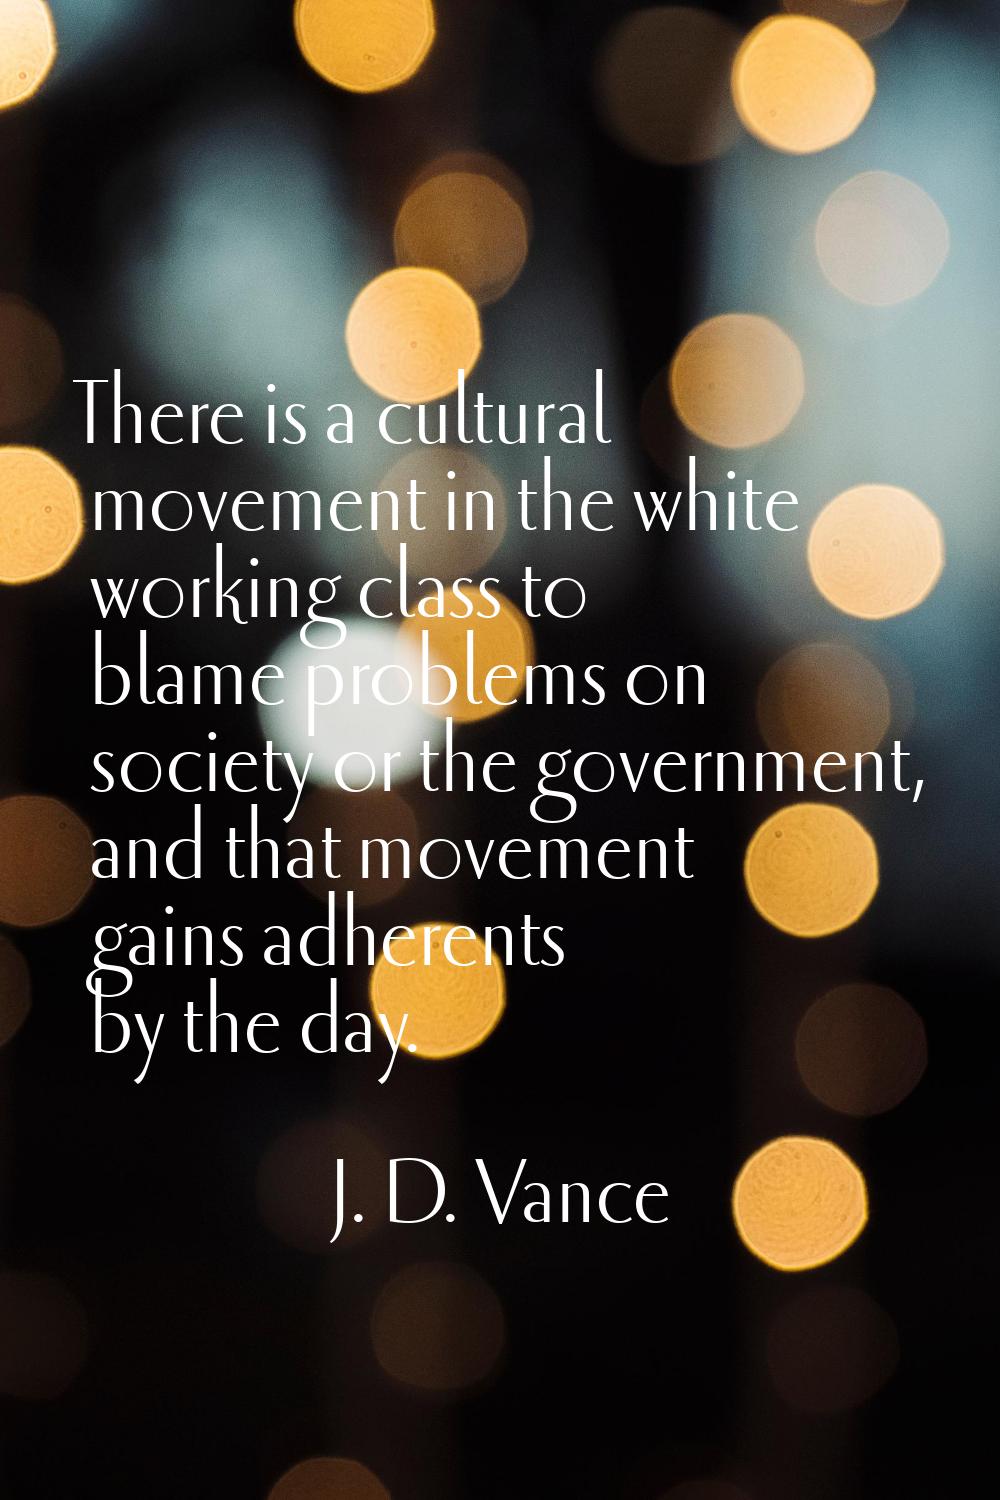 There is a cultural movement in the white working class to blame problems on society or the governm